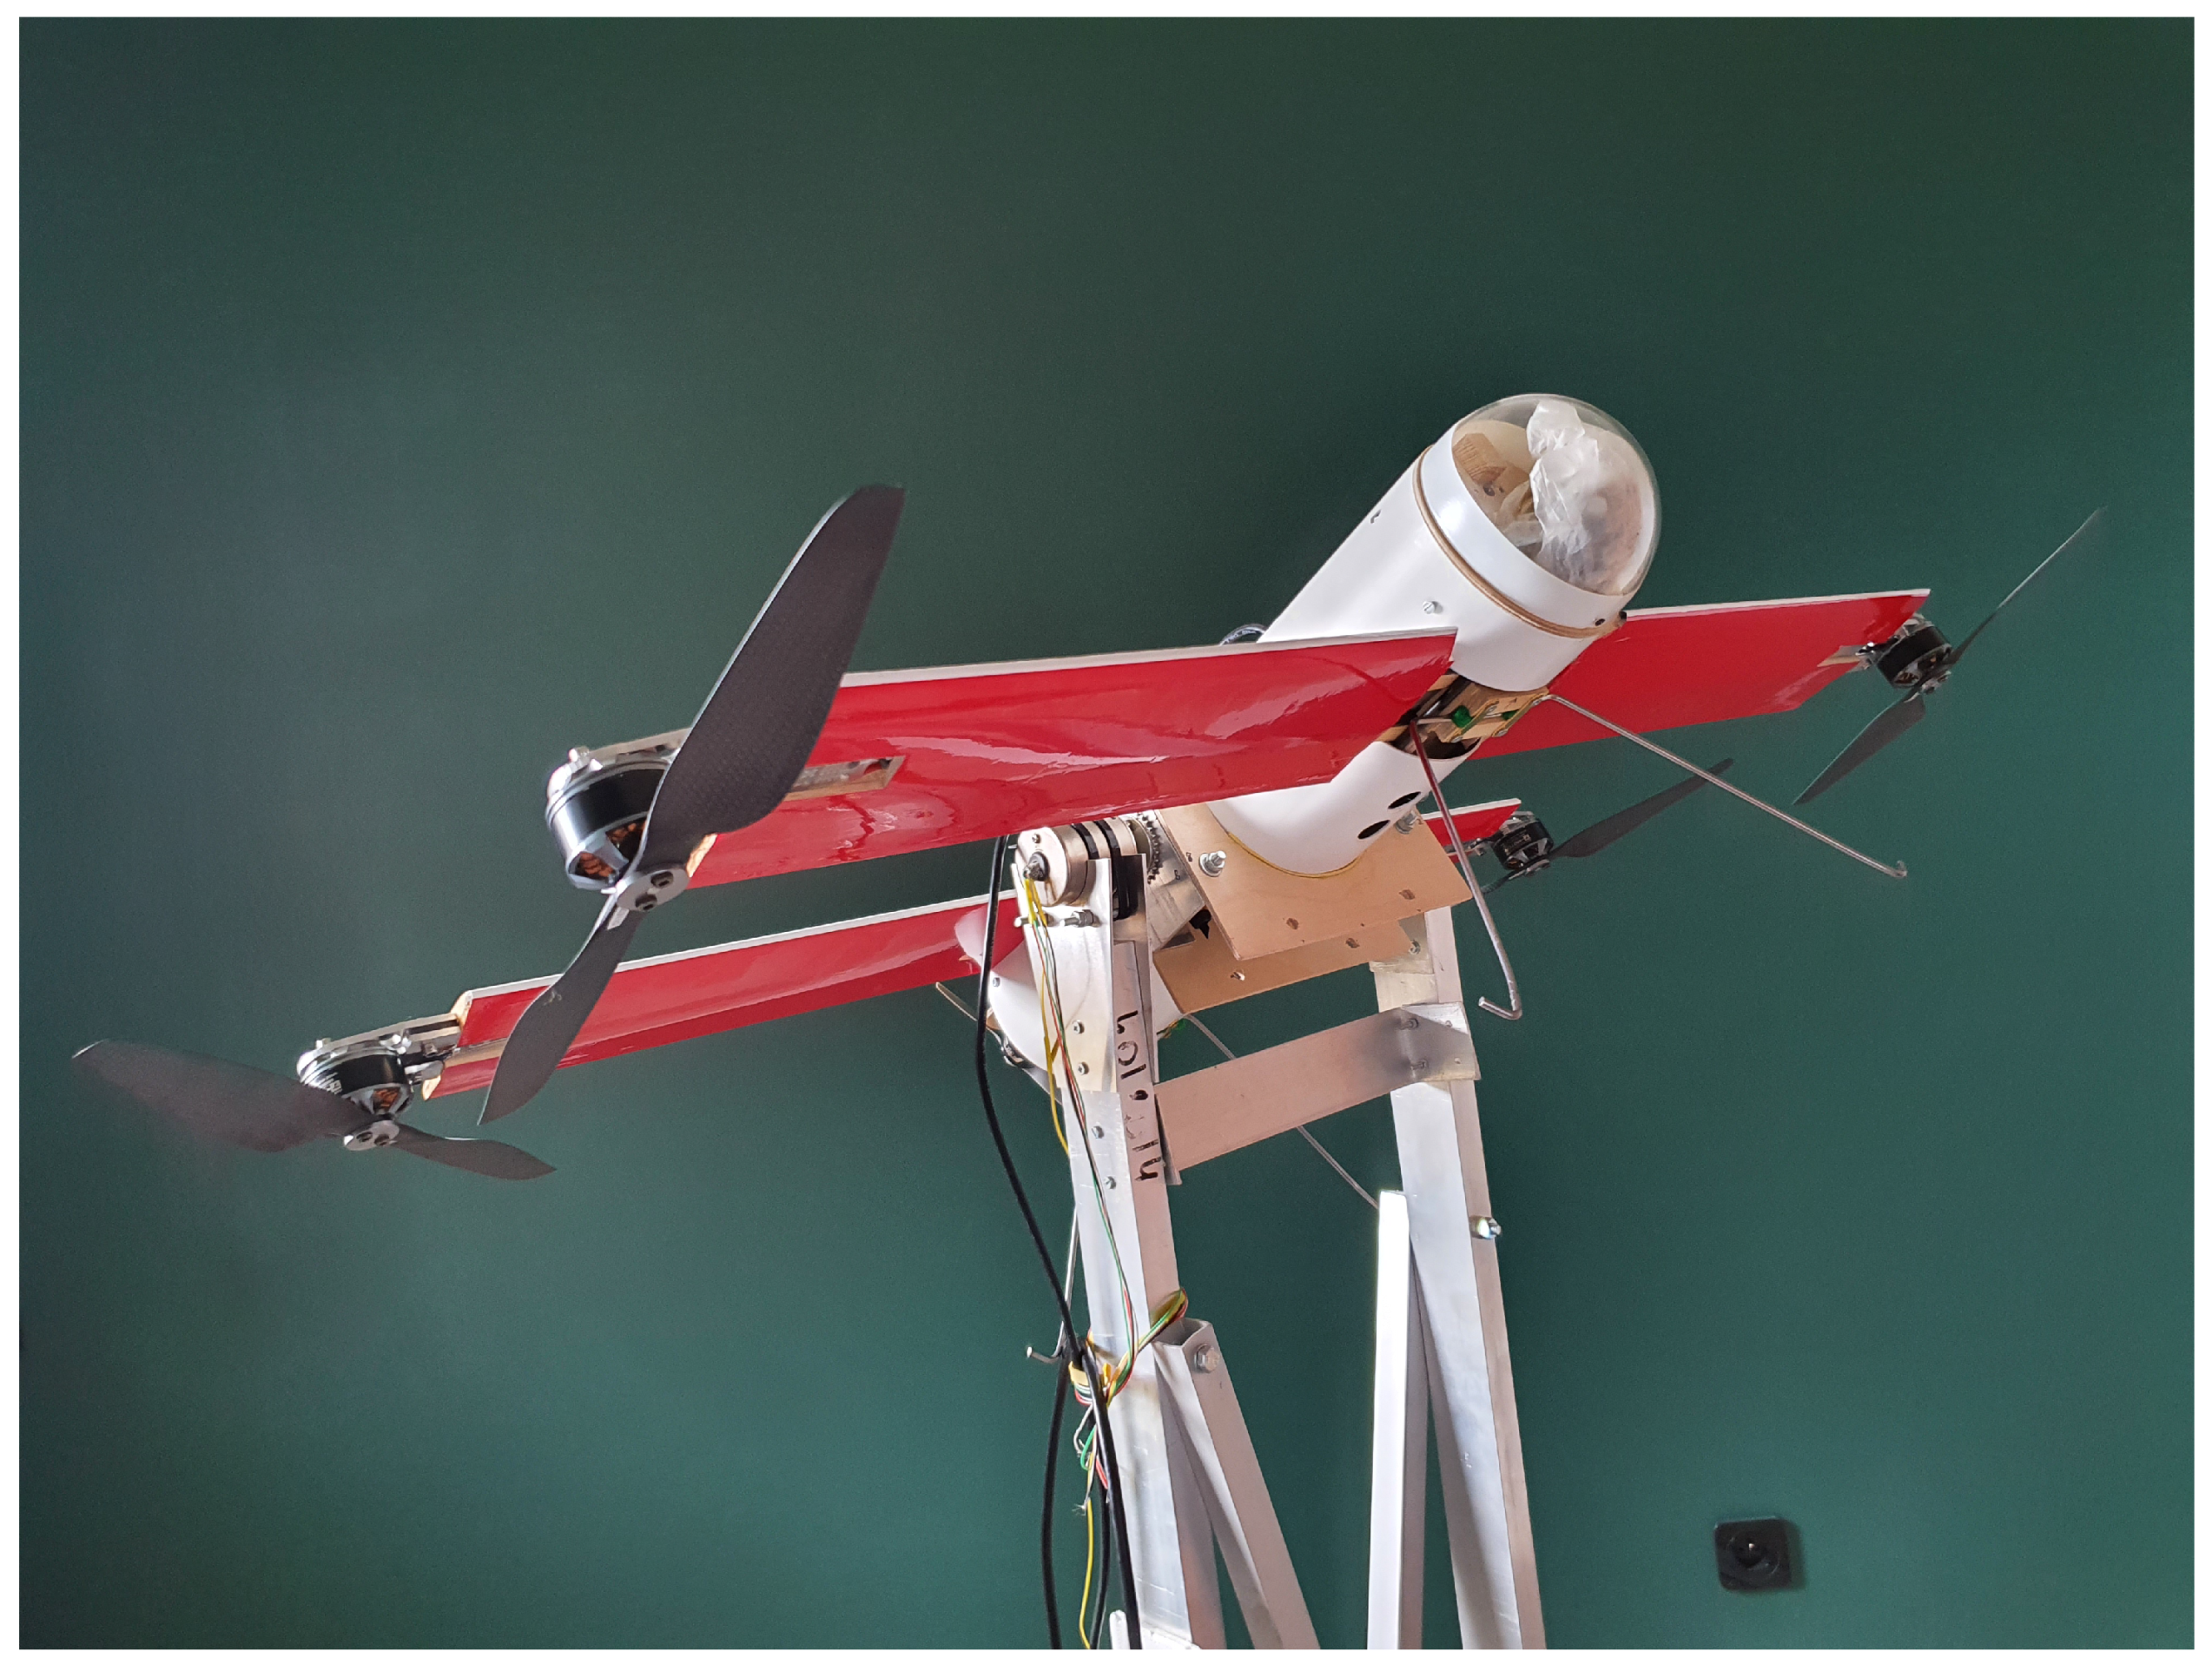 Energies | Free Full-Text | How Much Energy Do We Need to Fly with Greater  Agility? Energy Consumption and Performance of an Attitude Stabilization  Controller in a Quadcopter Drone: A Modified MPC